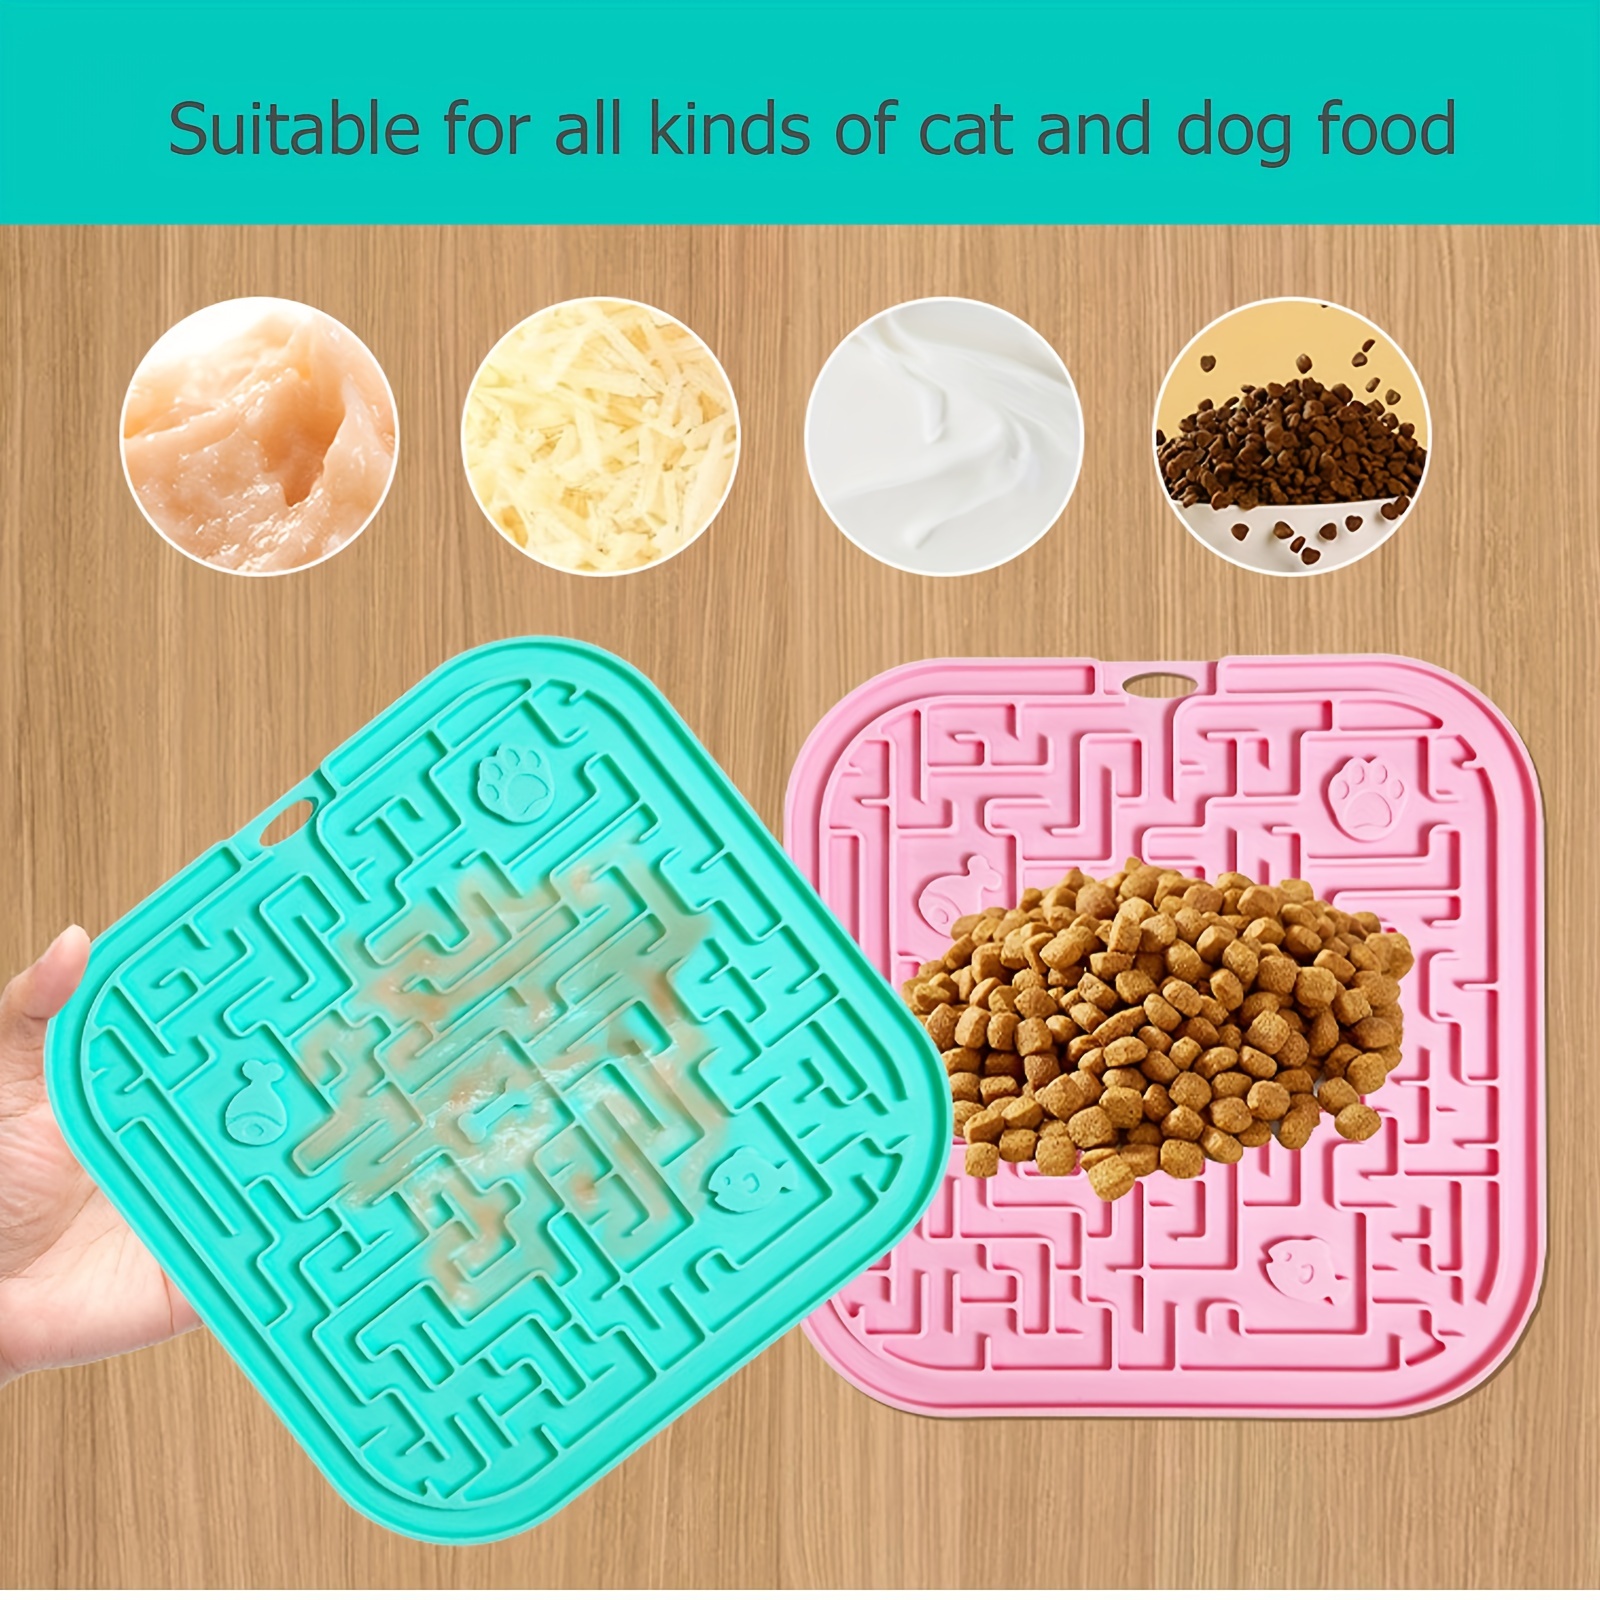  Lick Mat for Dogs Slow Feeder Licking Mat Anxiety Relief Lick  Pad with Suction Cups for Peanut Butter Food Treats Yogurt, Pets Bathing  Grooming Training Calming Mat - 2 Pack 